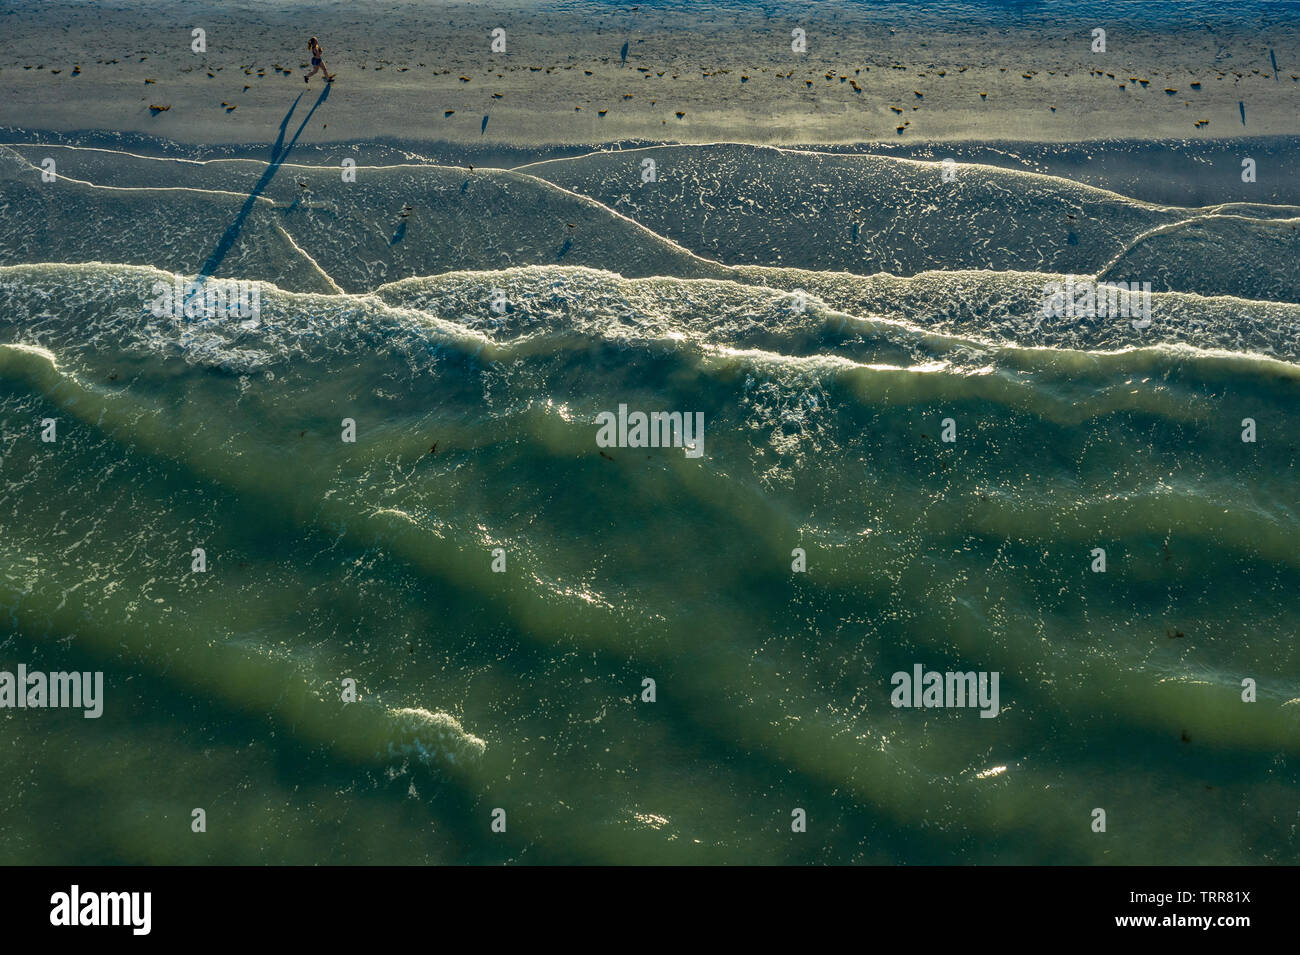 Ariel view of woman running along beach as waves roll in St. Pete Beach Florida. Stock Photo